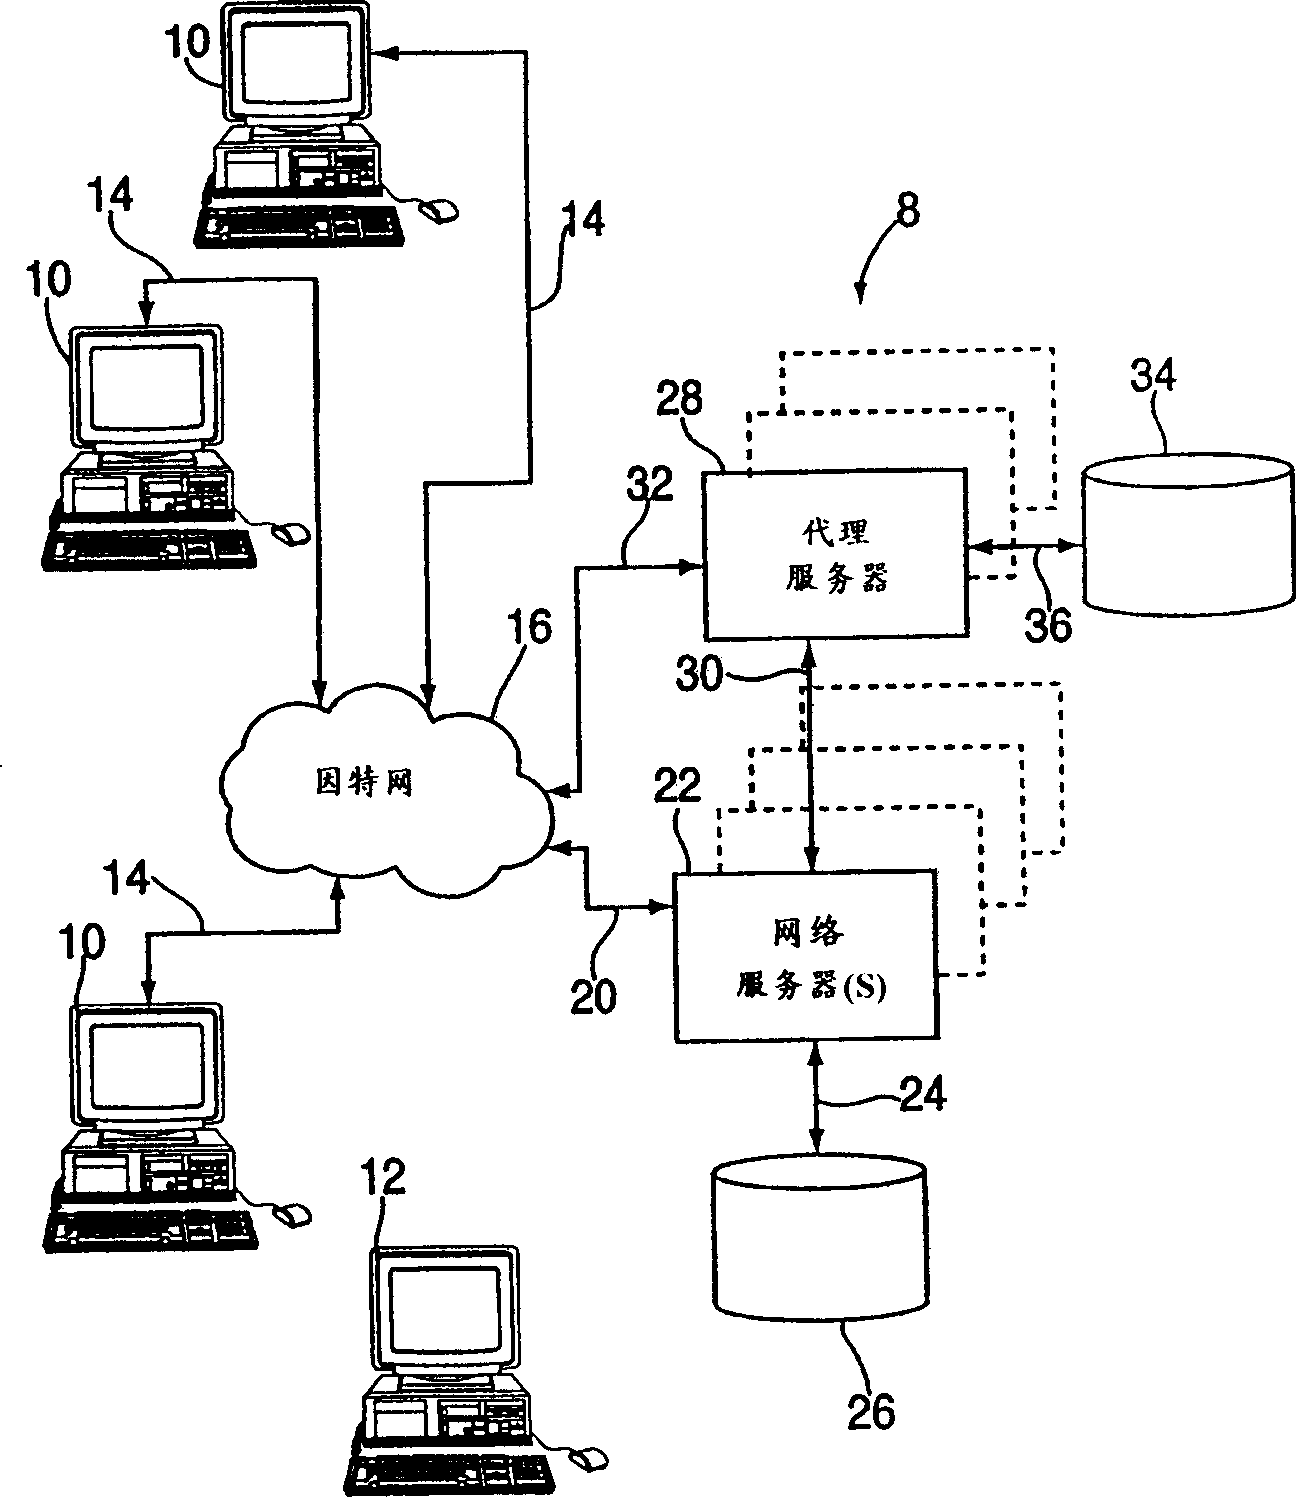 Method for providing resource from network server to client computer